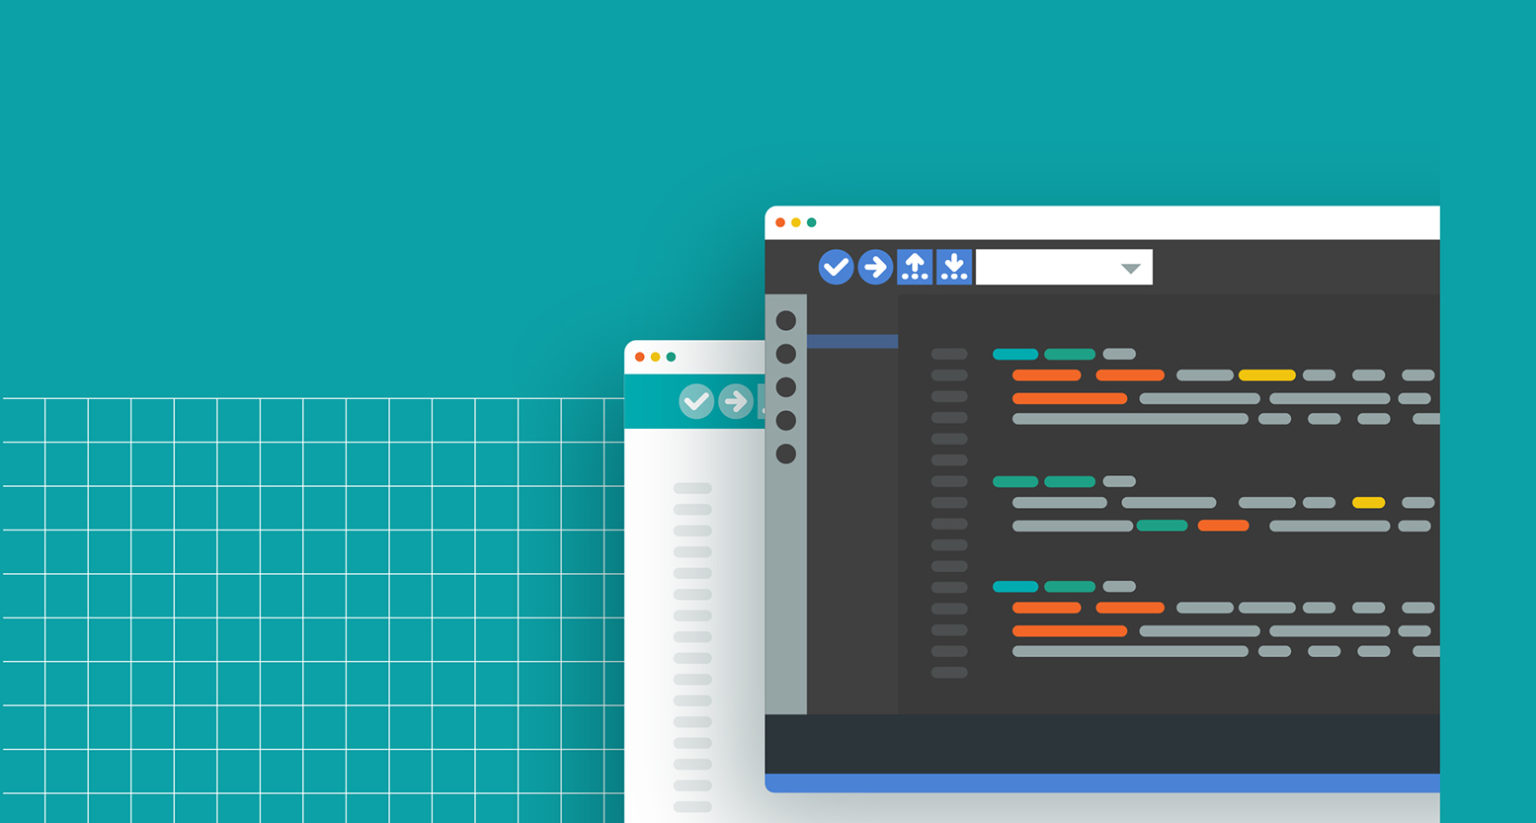 Ardunio IDE 2.0 is finally here with new features and enhanced UI